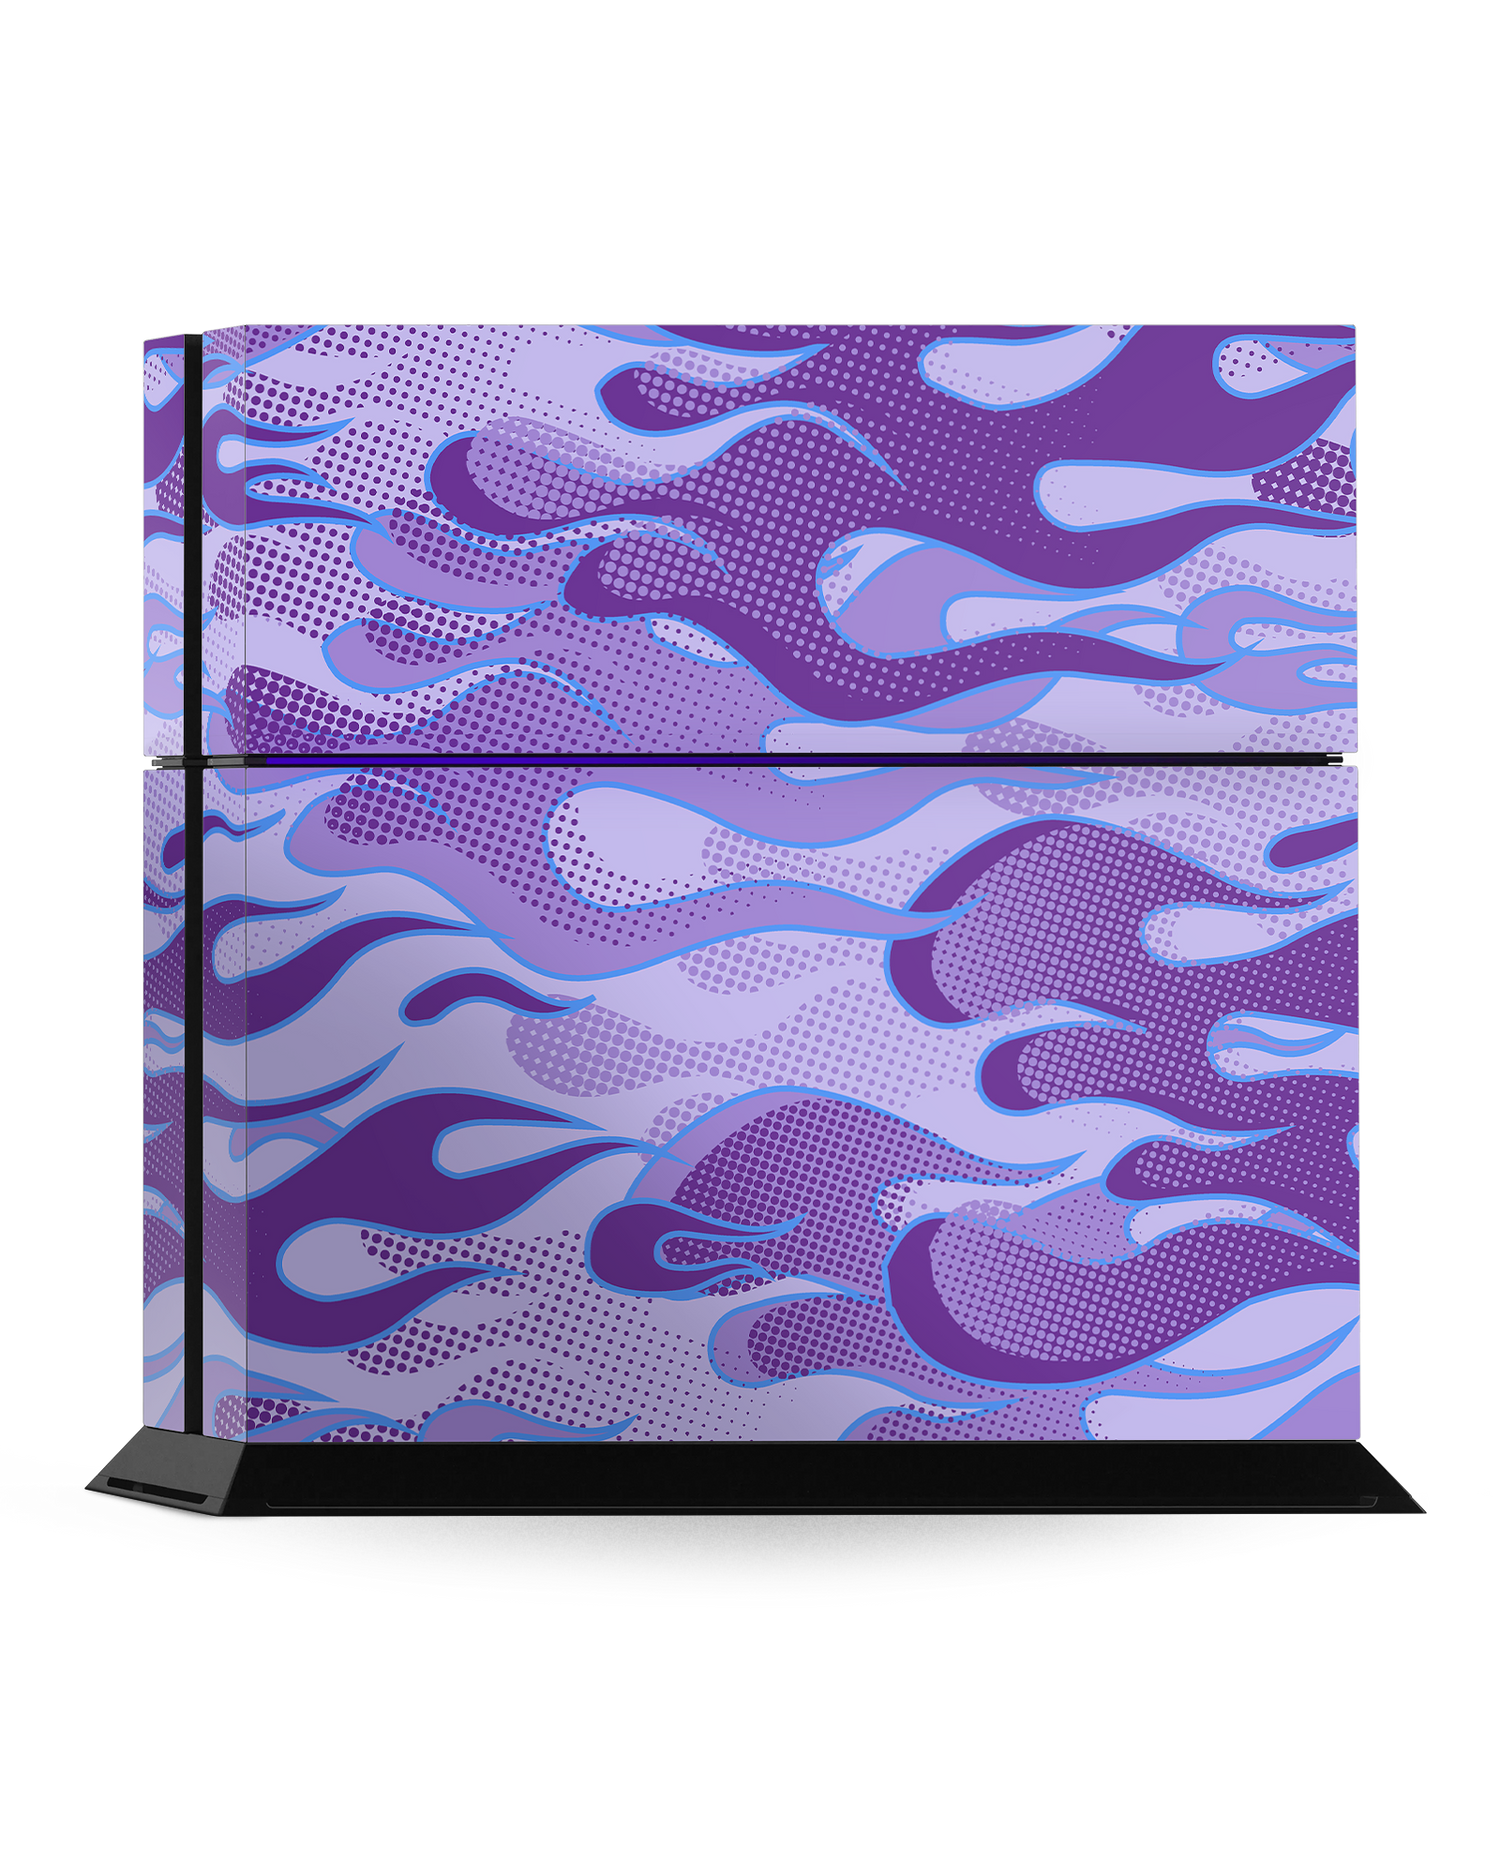 Purple Flames Console Skin for Sony PlayStation 4: Standing